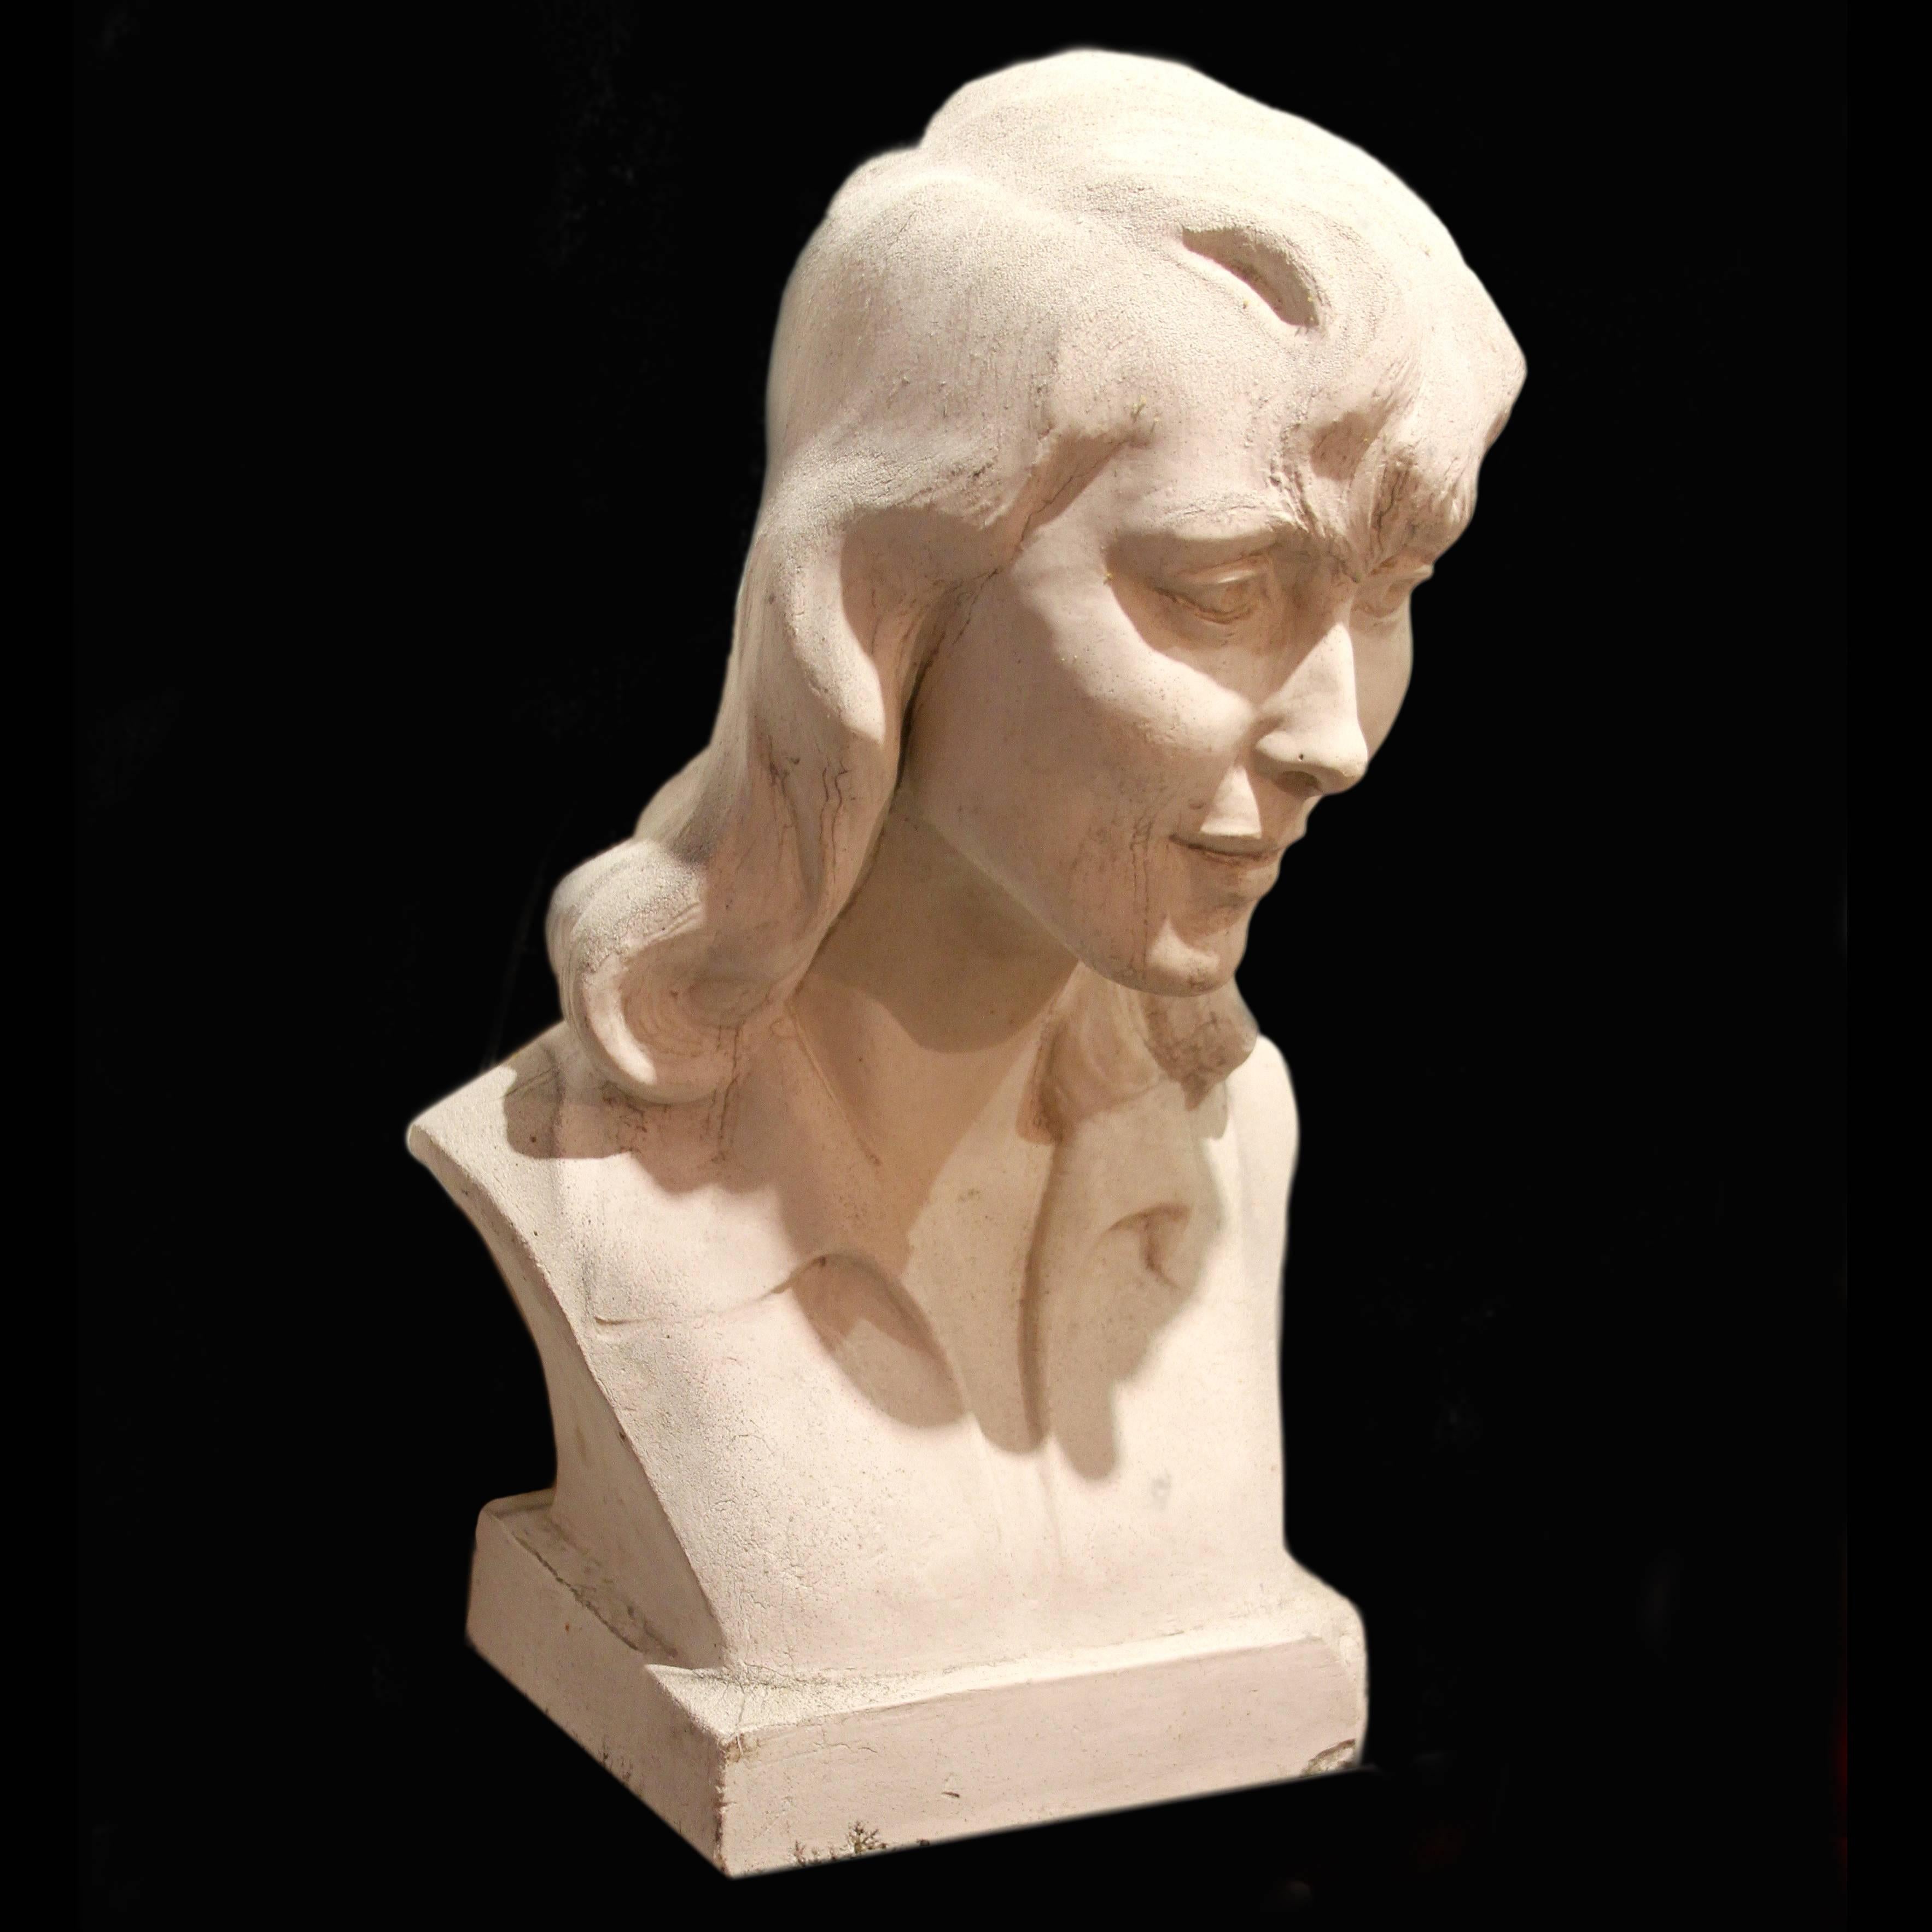 Gallery presents sculptures by Bernhard D. Sopher, a major sculptor of the mid-20th century. During Sopher's short time in the United States, he became a well known and respected  who constructed works in all types of sculptural medium from marble